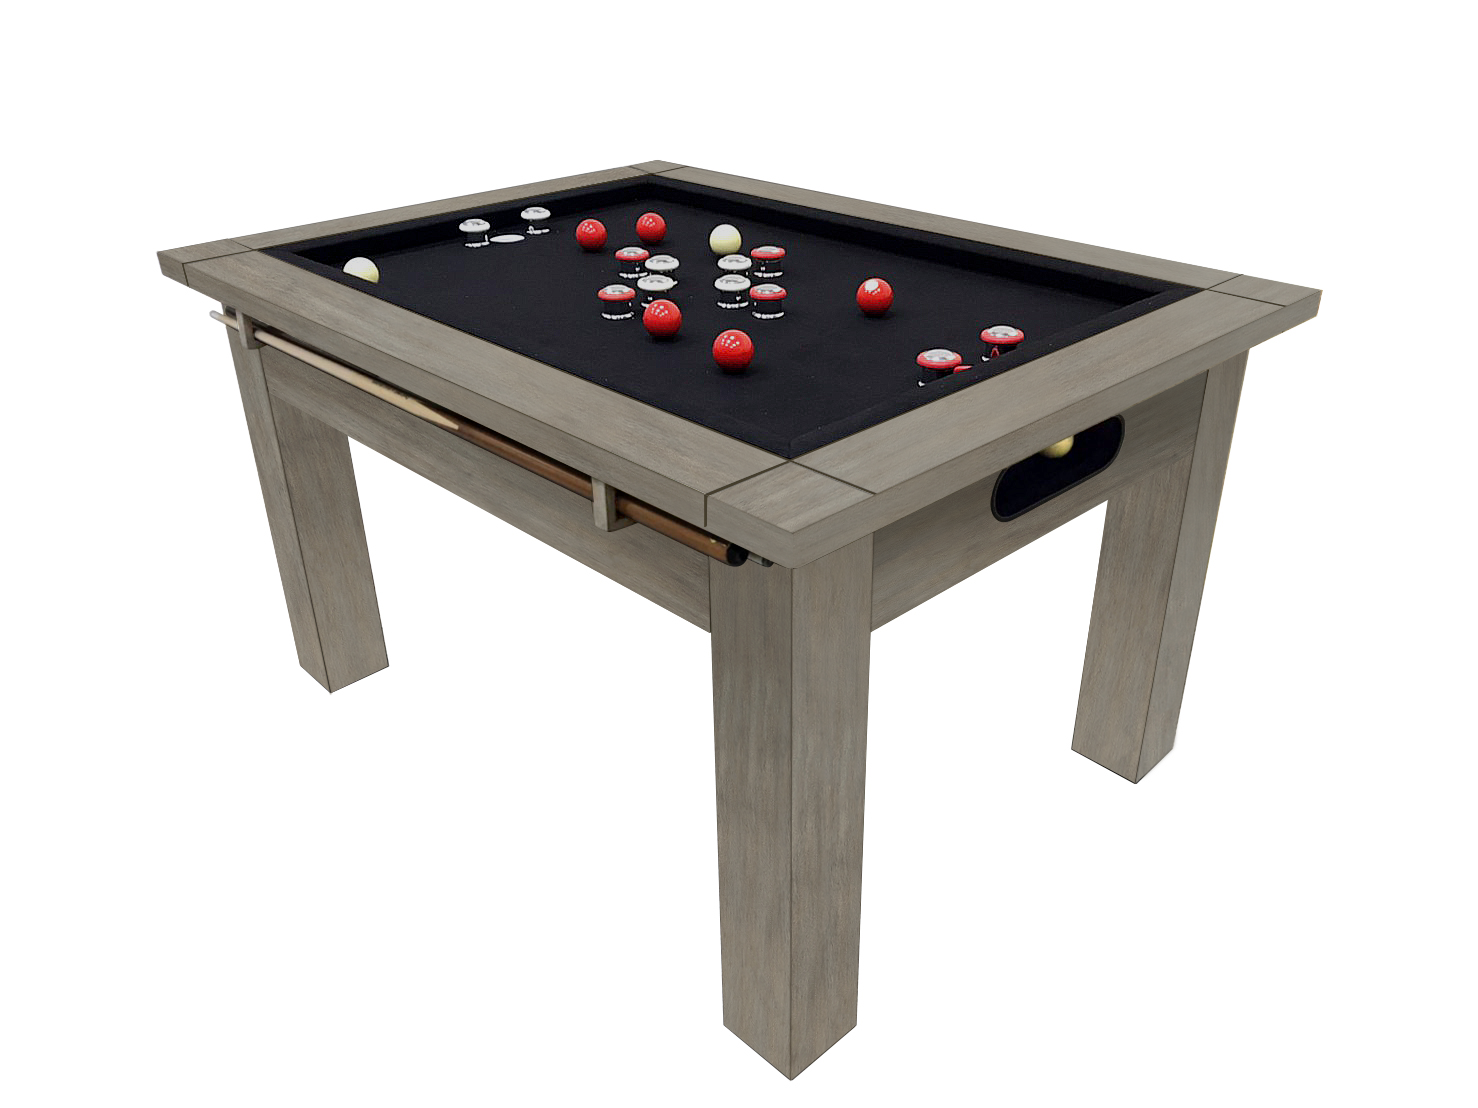 Legacy Billiards Baylor Bumper Pool Table in Overcast Finish